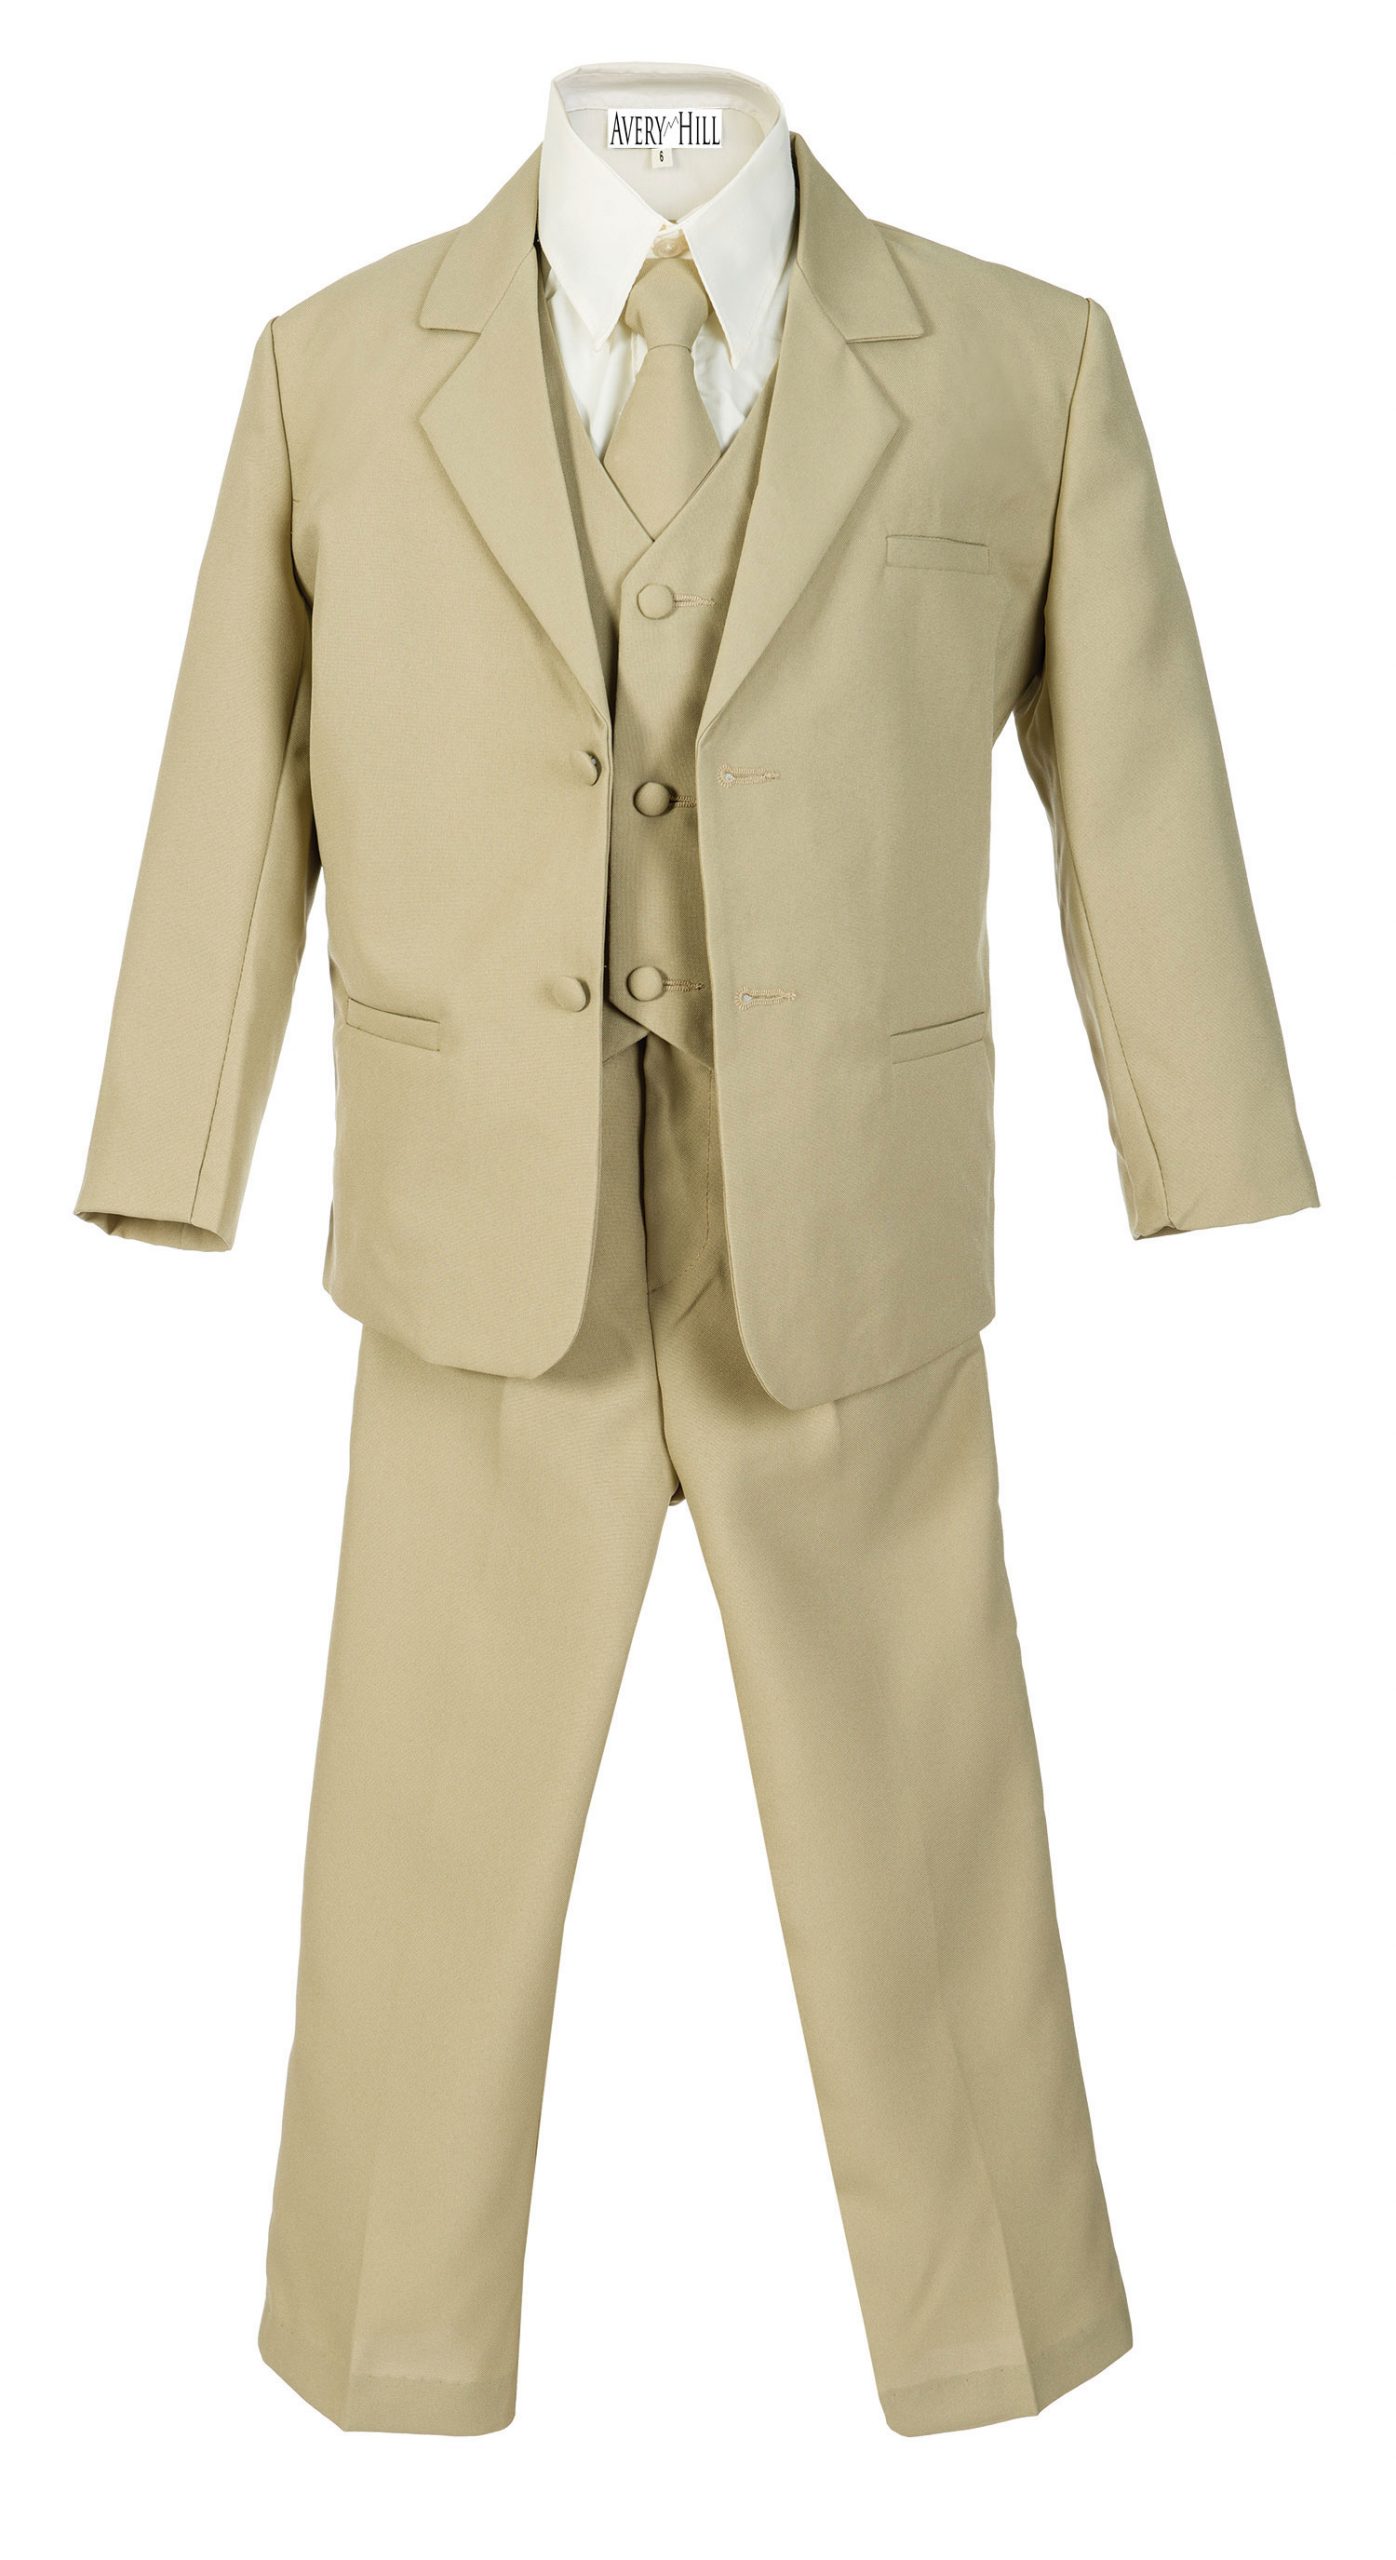 Avery Hill Boys Formal 5 Piece Suit with Shirt and Vest Khaki - XL